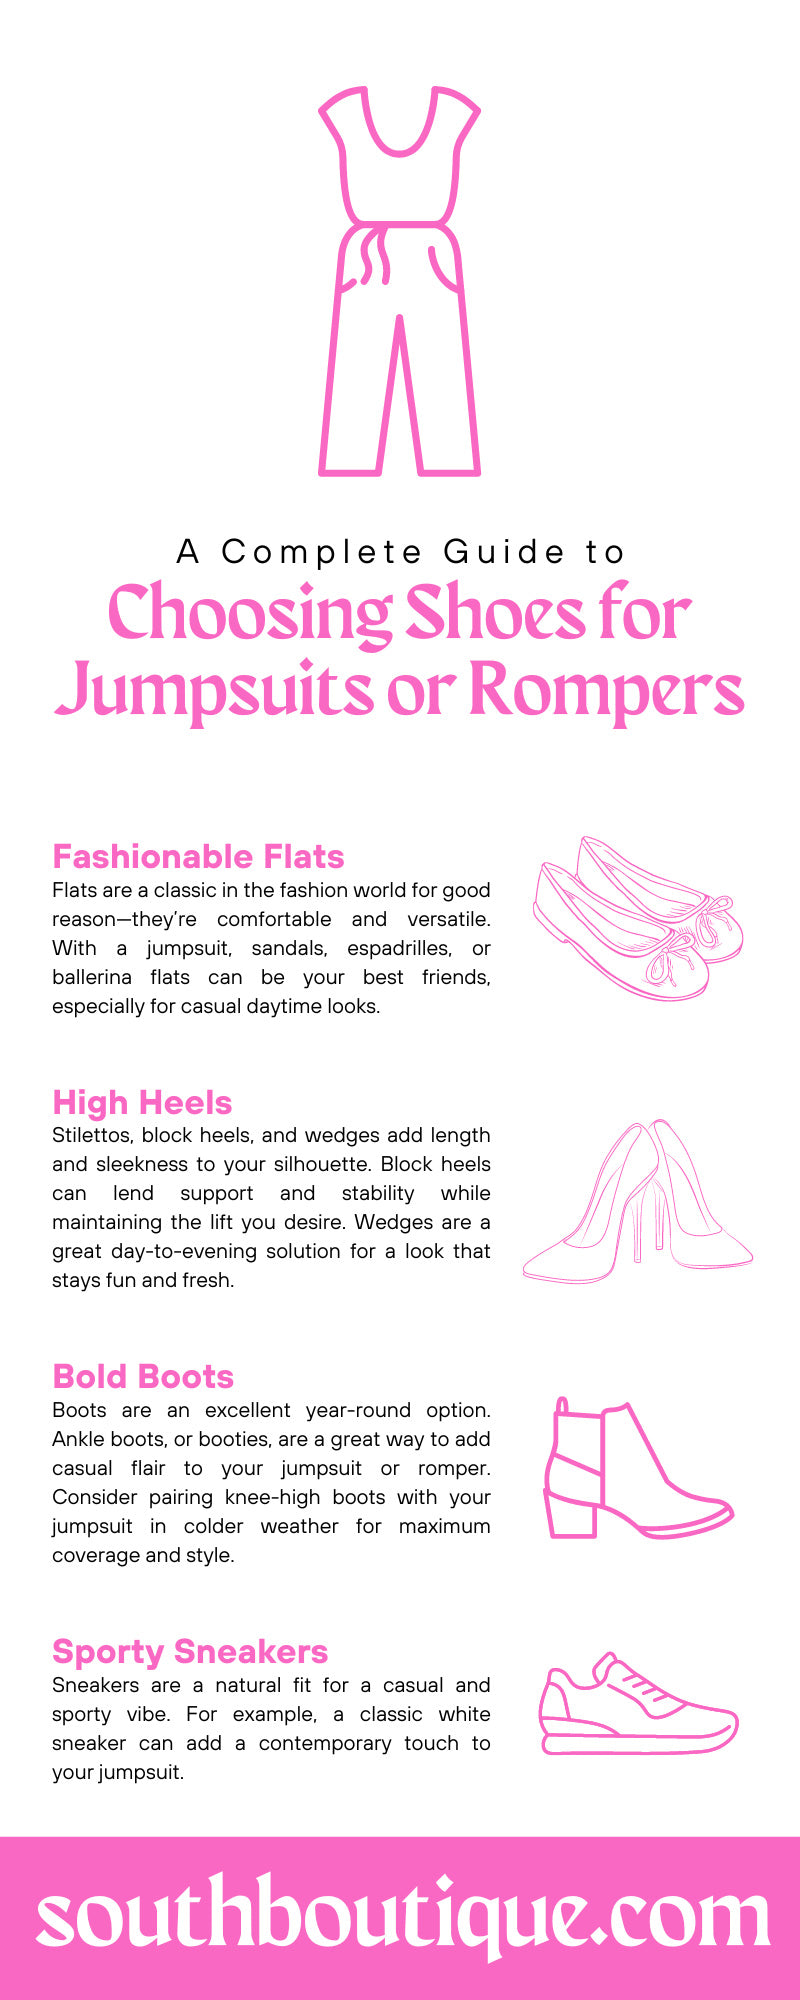 A Complete Guide to Choosing Shoes for Jumpsuits or Rompers